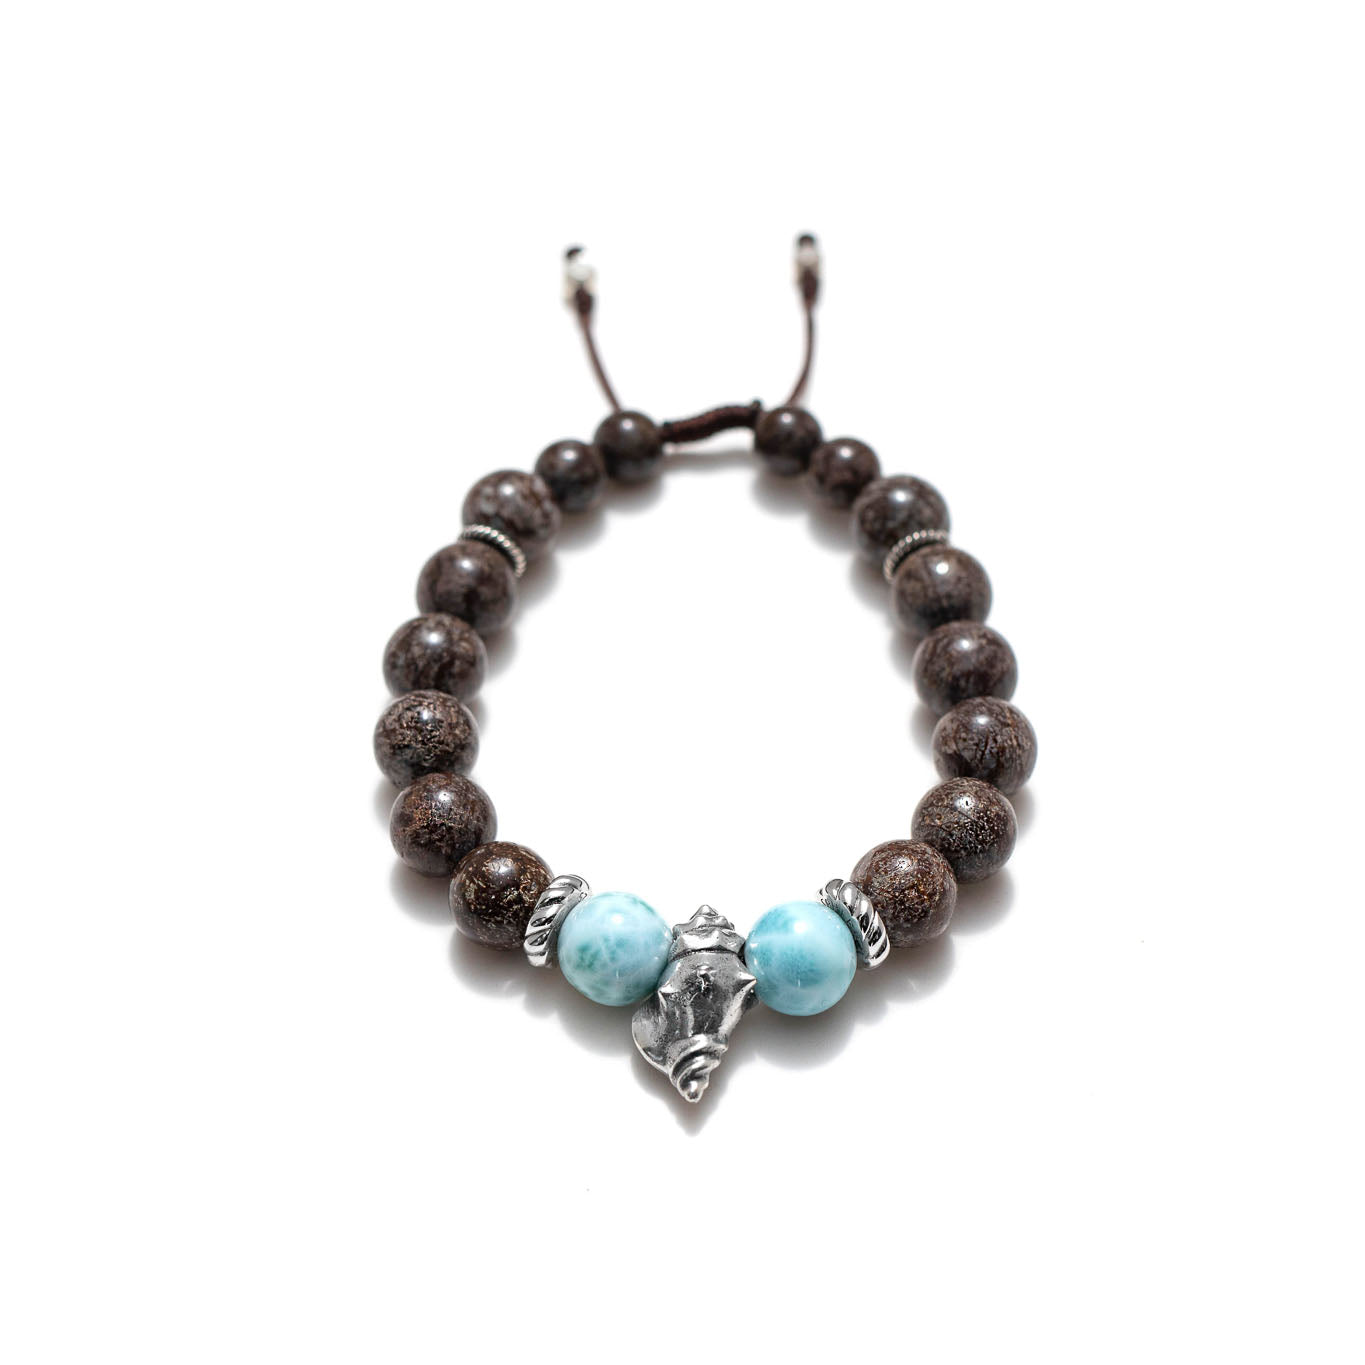 Beaded Premium Solid Sterling Silver Conch Shell, Dominican Larimar & Chocolate Obsidian Bracelet